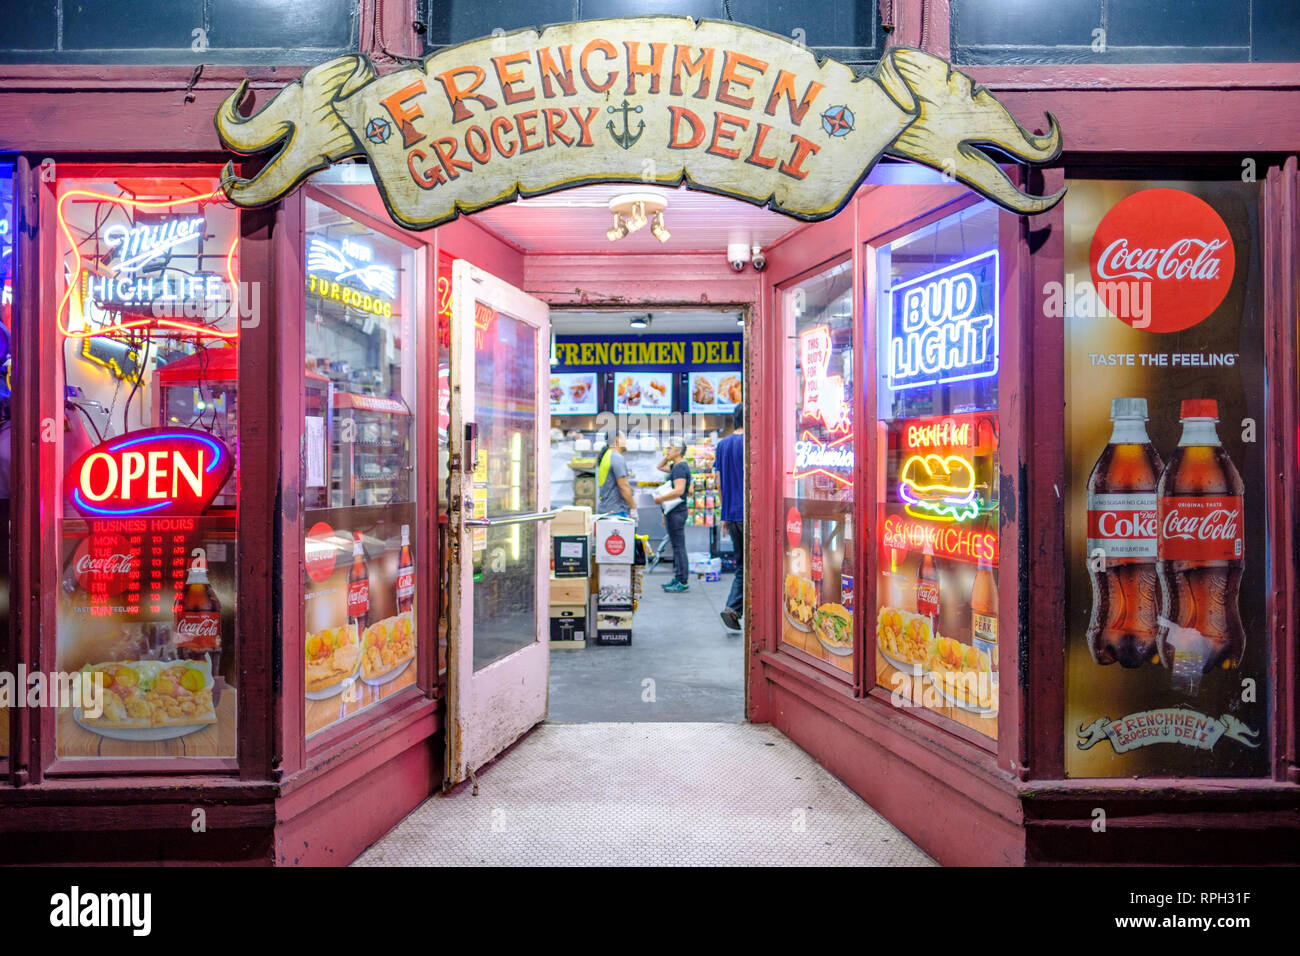 Frenchmen Grocery & Deli, Frenchmen Grocery and Deli storefront, Frenchmen Street, New Orleans French Quarter, Marigny, New Orleans, Louisiana, USA Foto Stock